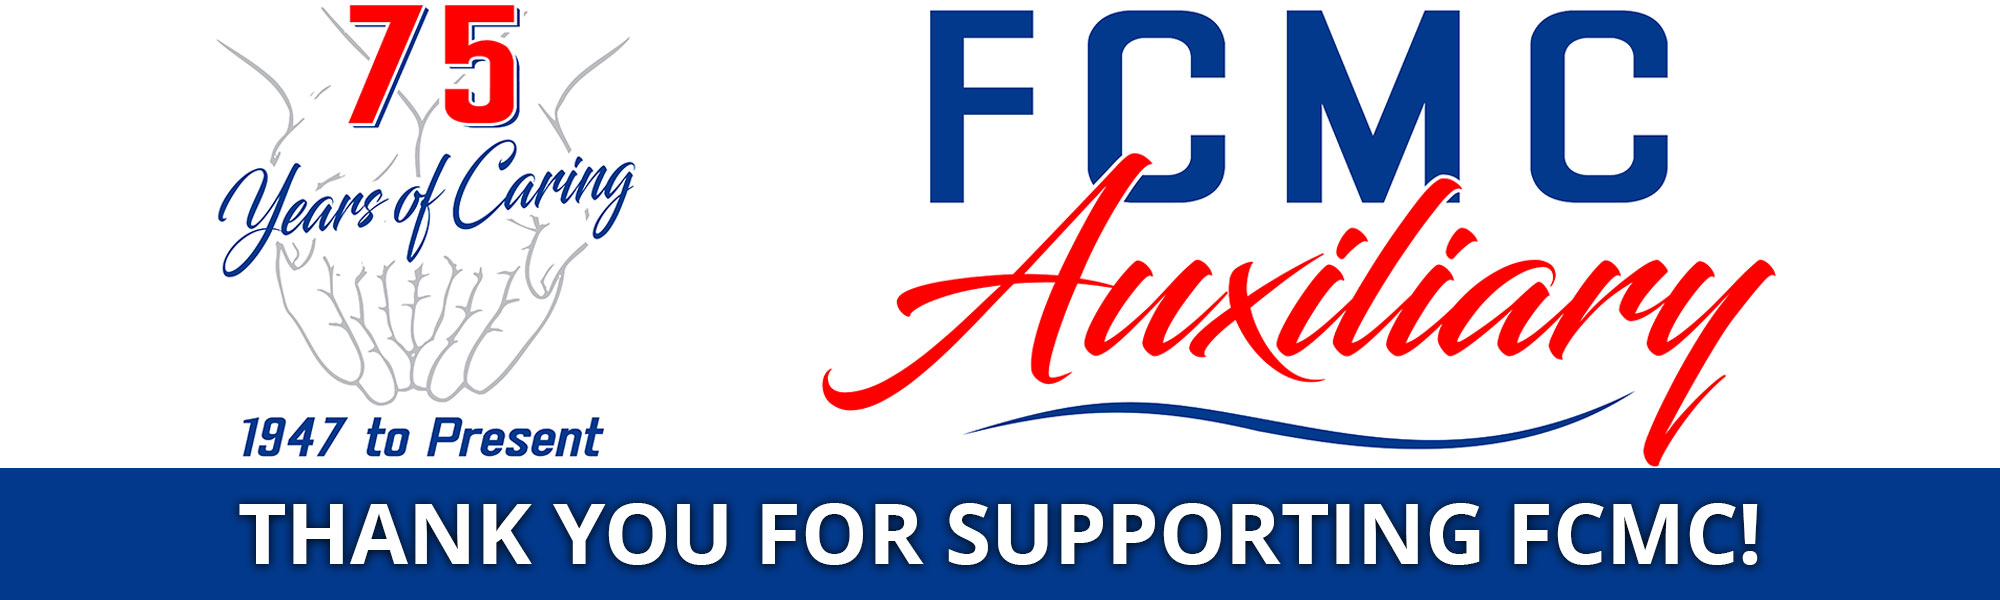 75 Years of Caring
1947 to Present

FCMC Auxiliary

Thank you for supporting FCMC!